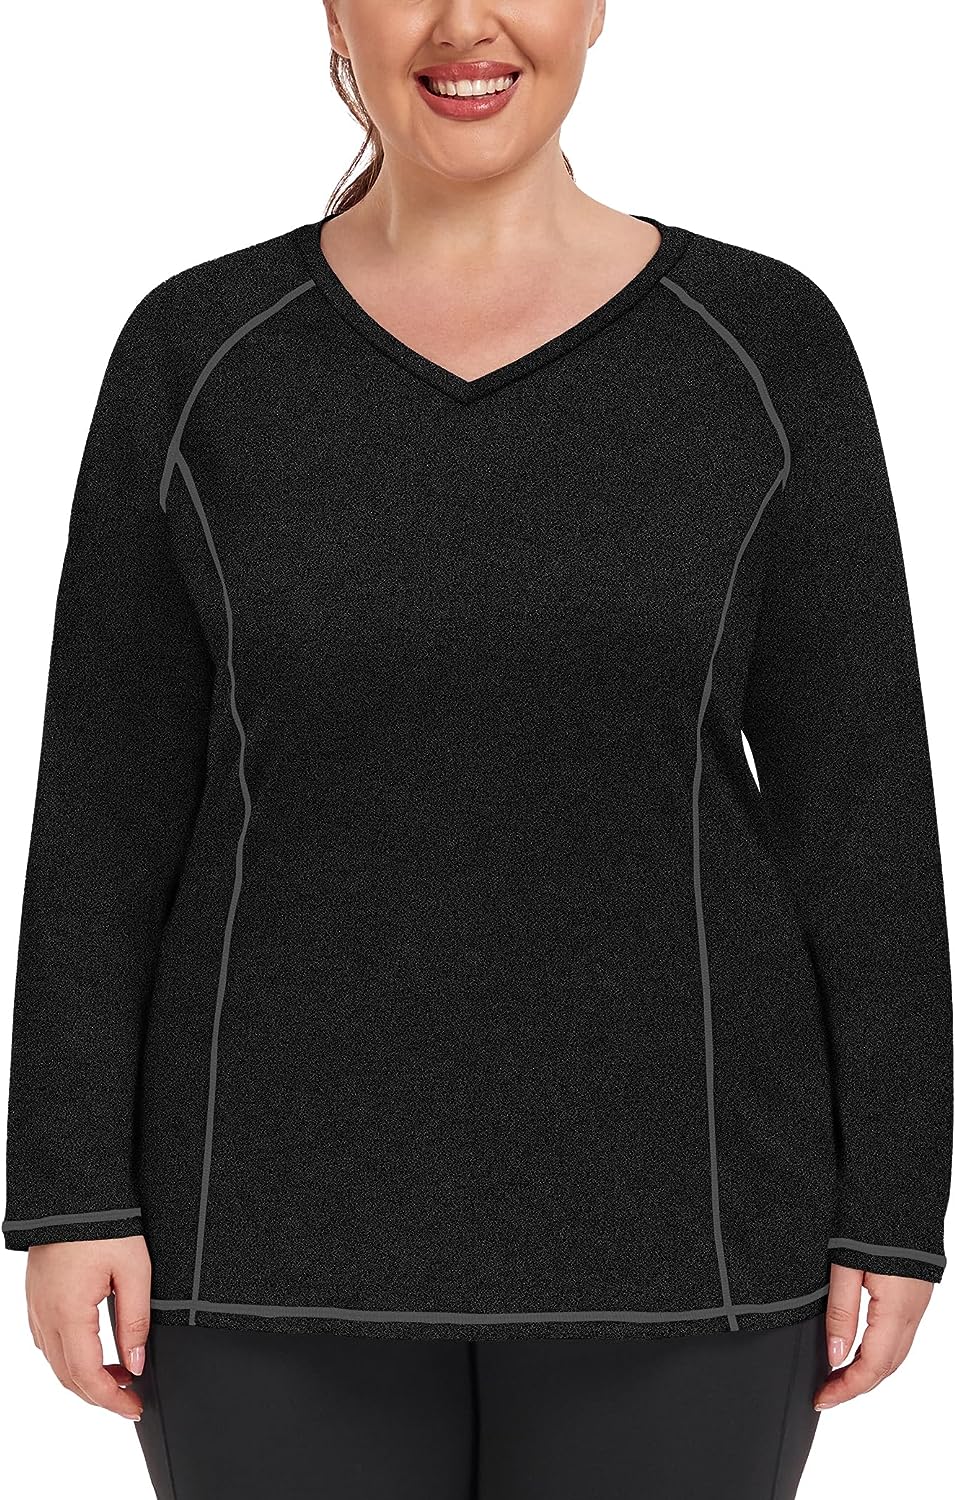 COOTRY Plus Size Workout Tops for Women Long Sleeve Loose Fit